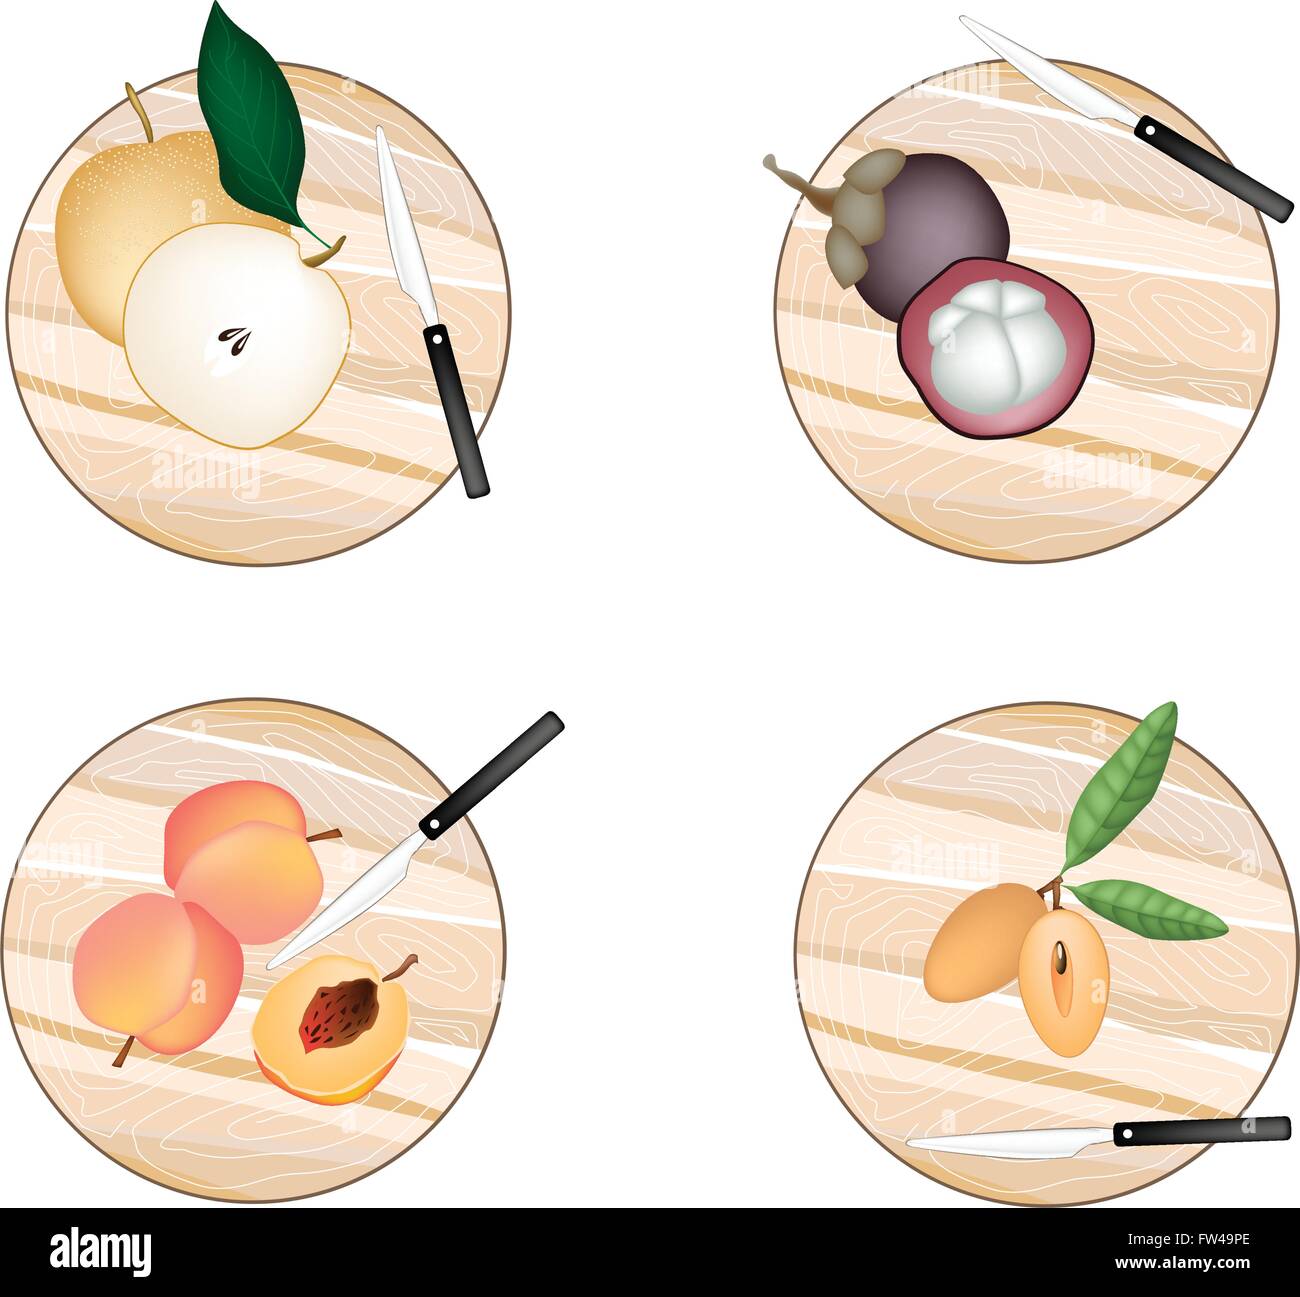 Fresh Fruit, Chinese Pear, Mangosteens, Peach and Sapodilla on Wooden Cutting Boards. Stock Vector